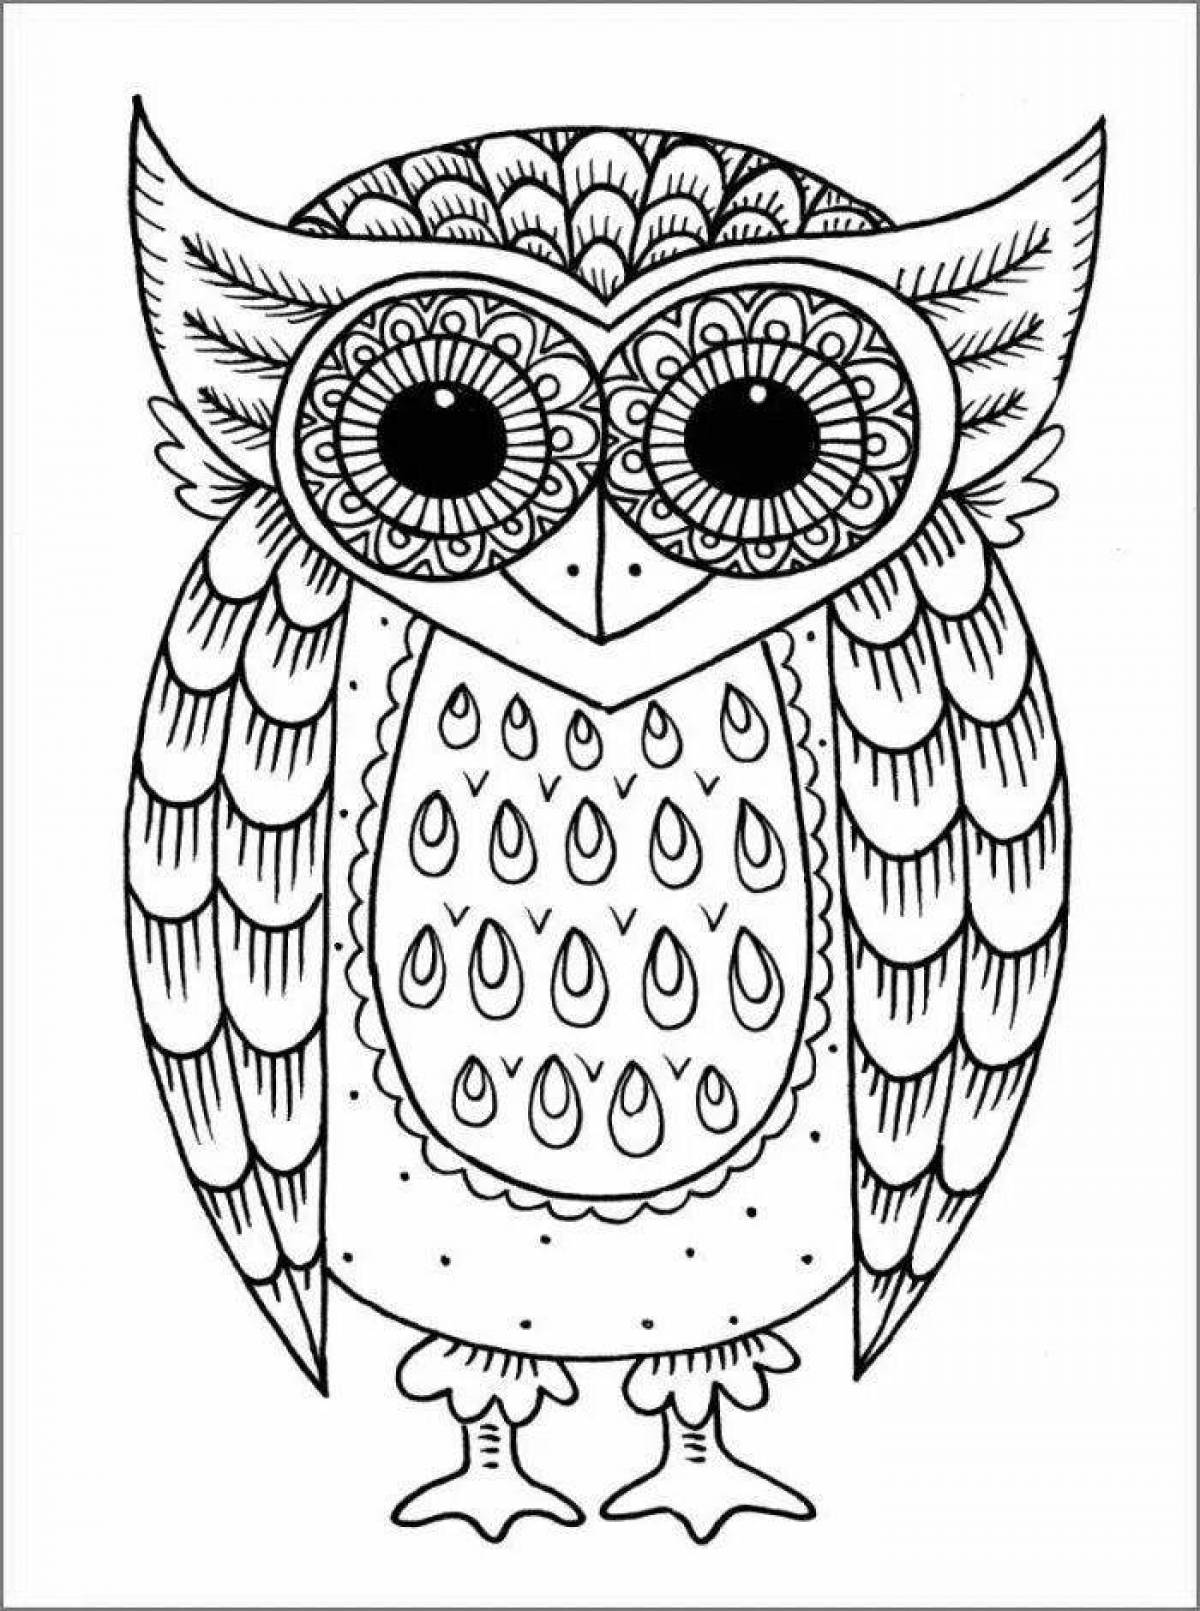 Coloring book drawing of an owl